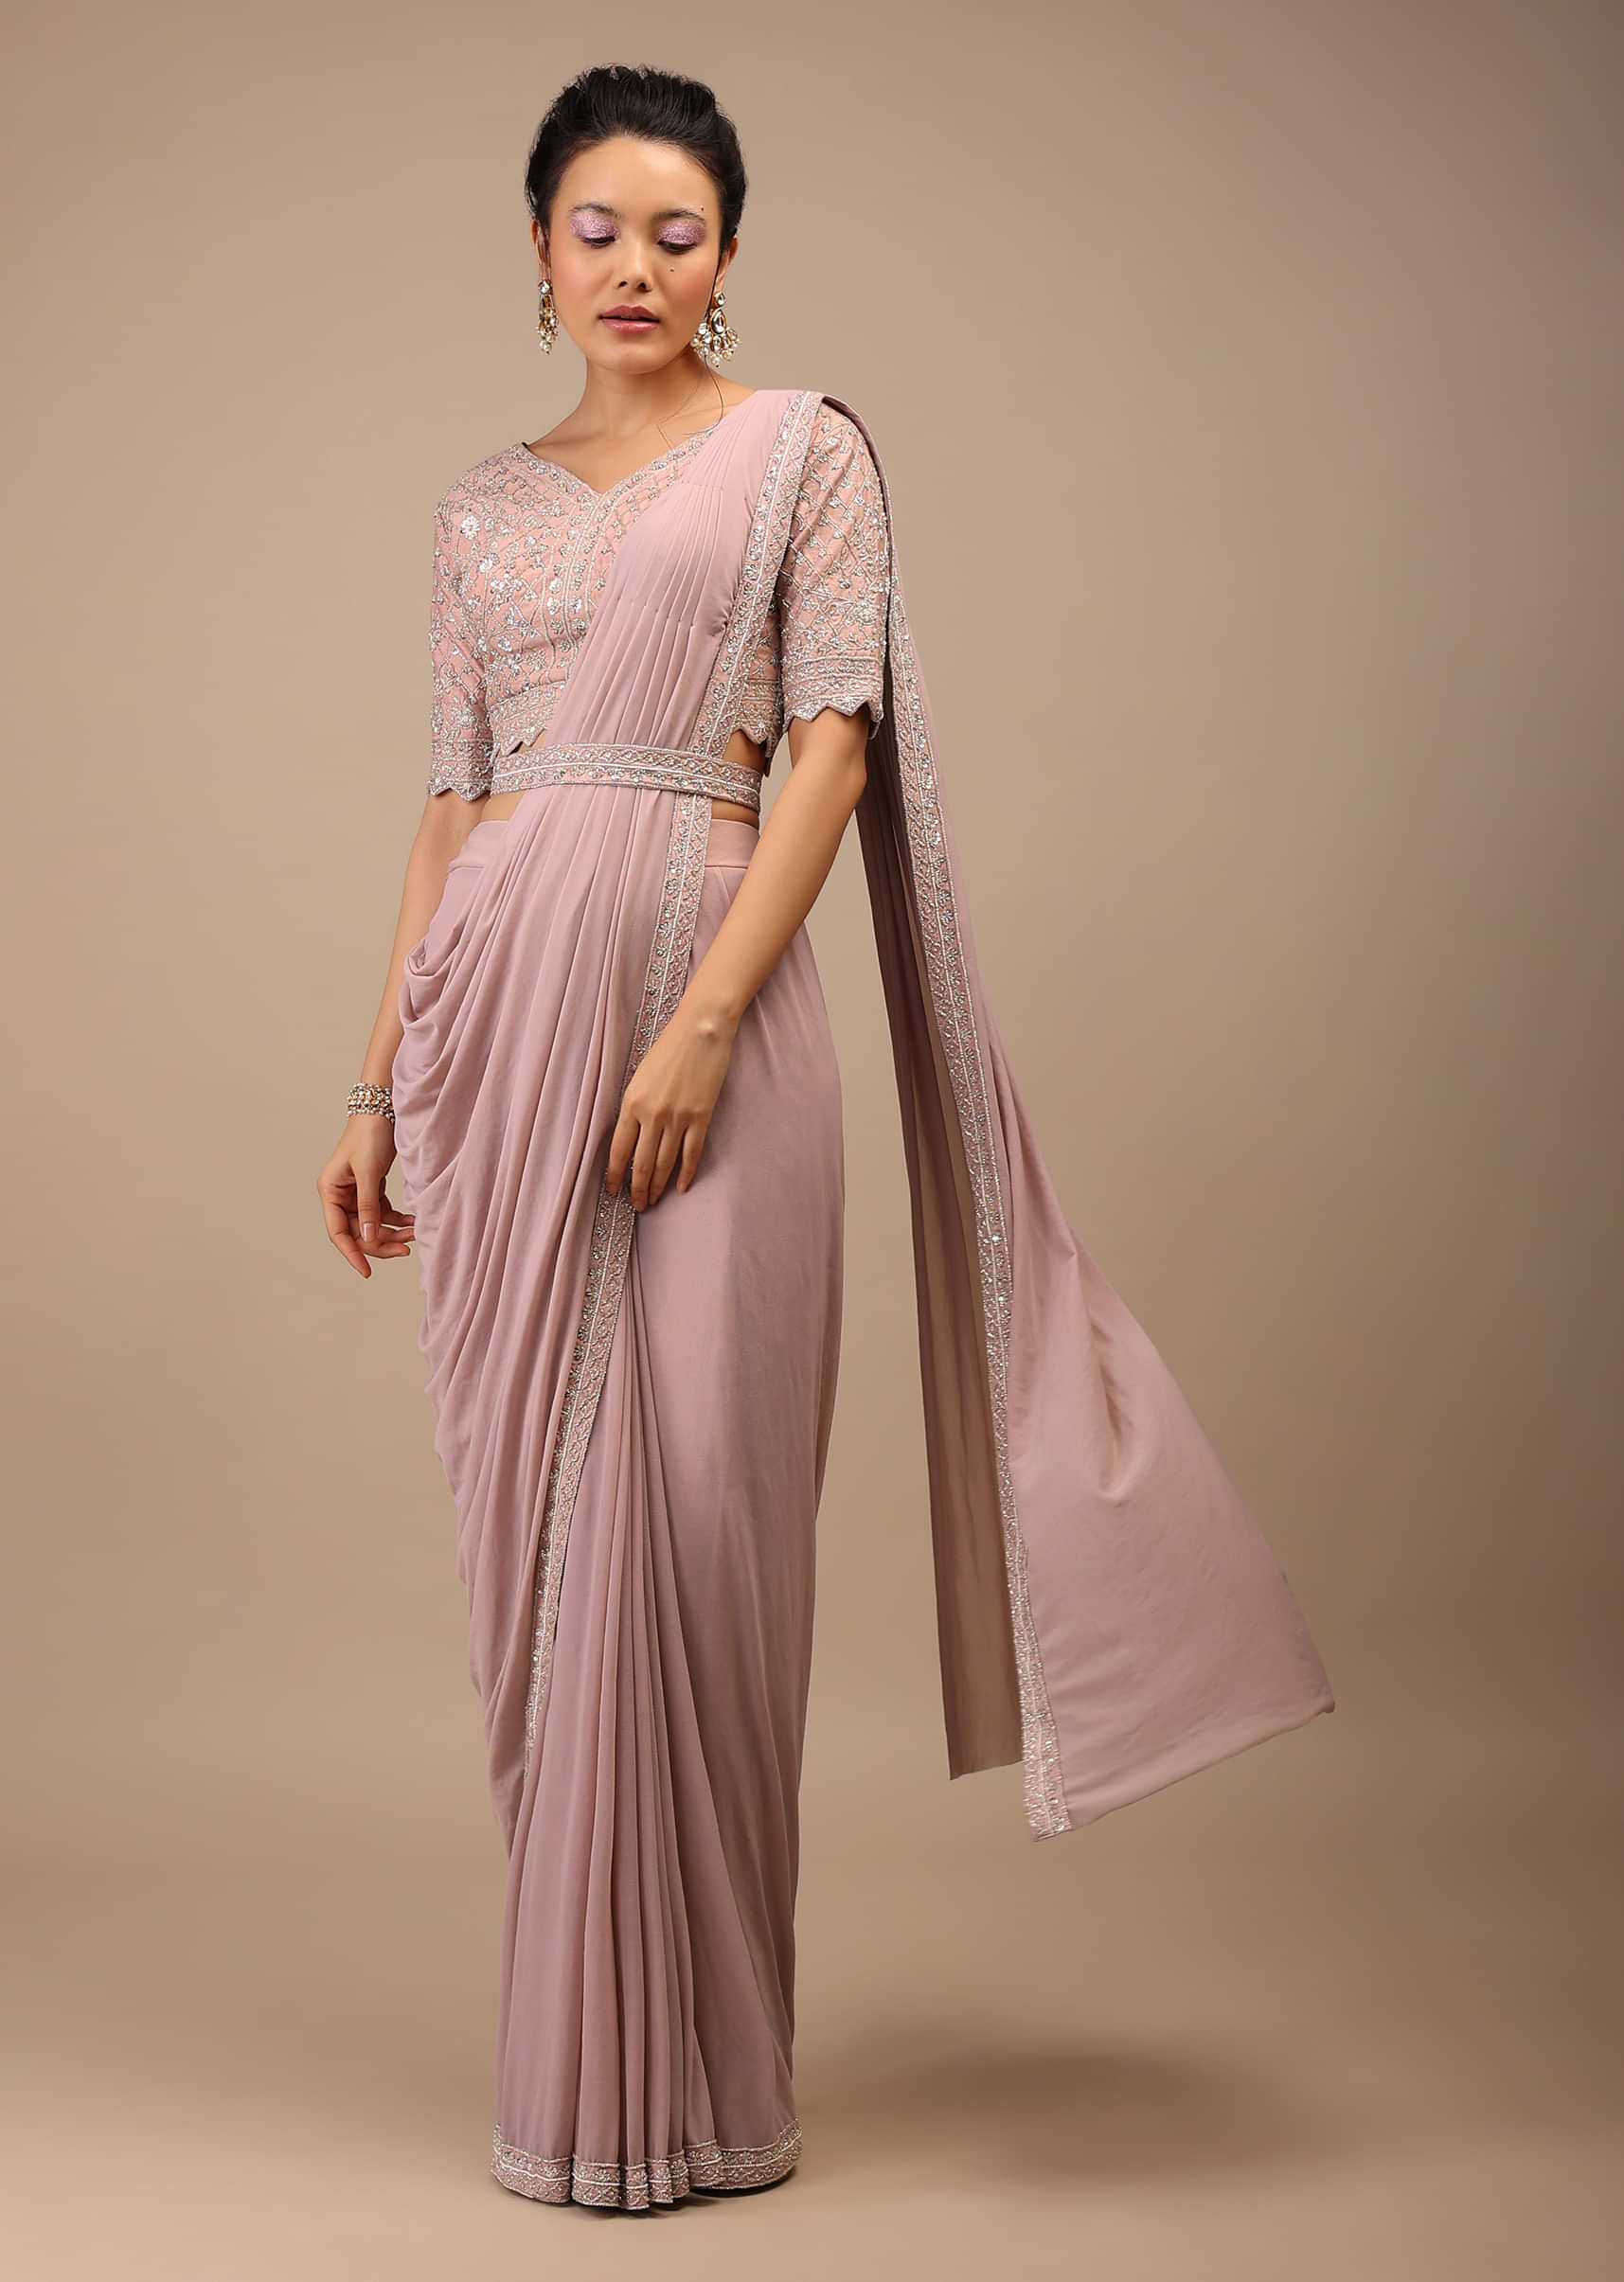 Misty Rose Pleated Saree In Lycra Blend Detailed With Embroidery Work On Pallu Border And Moroccan Jaal